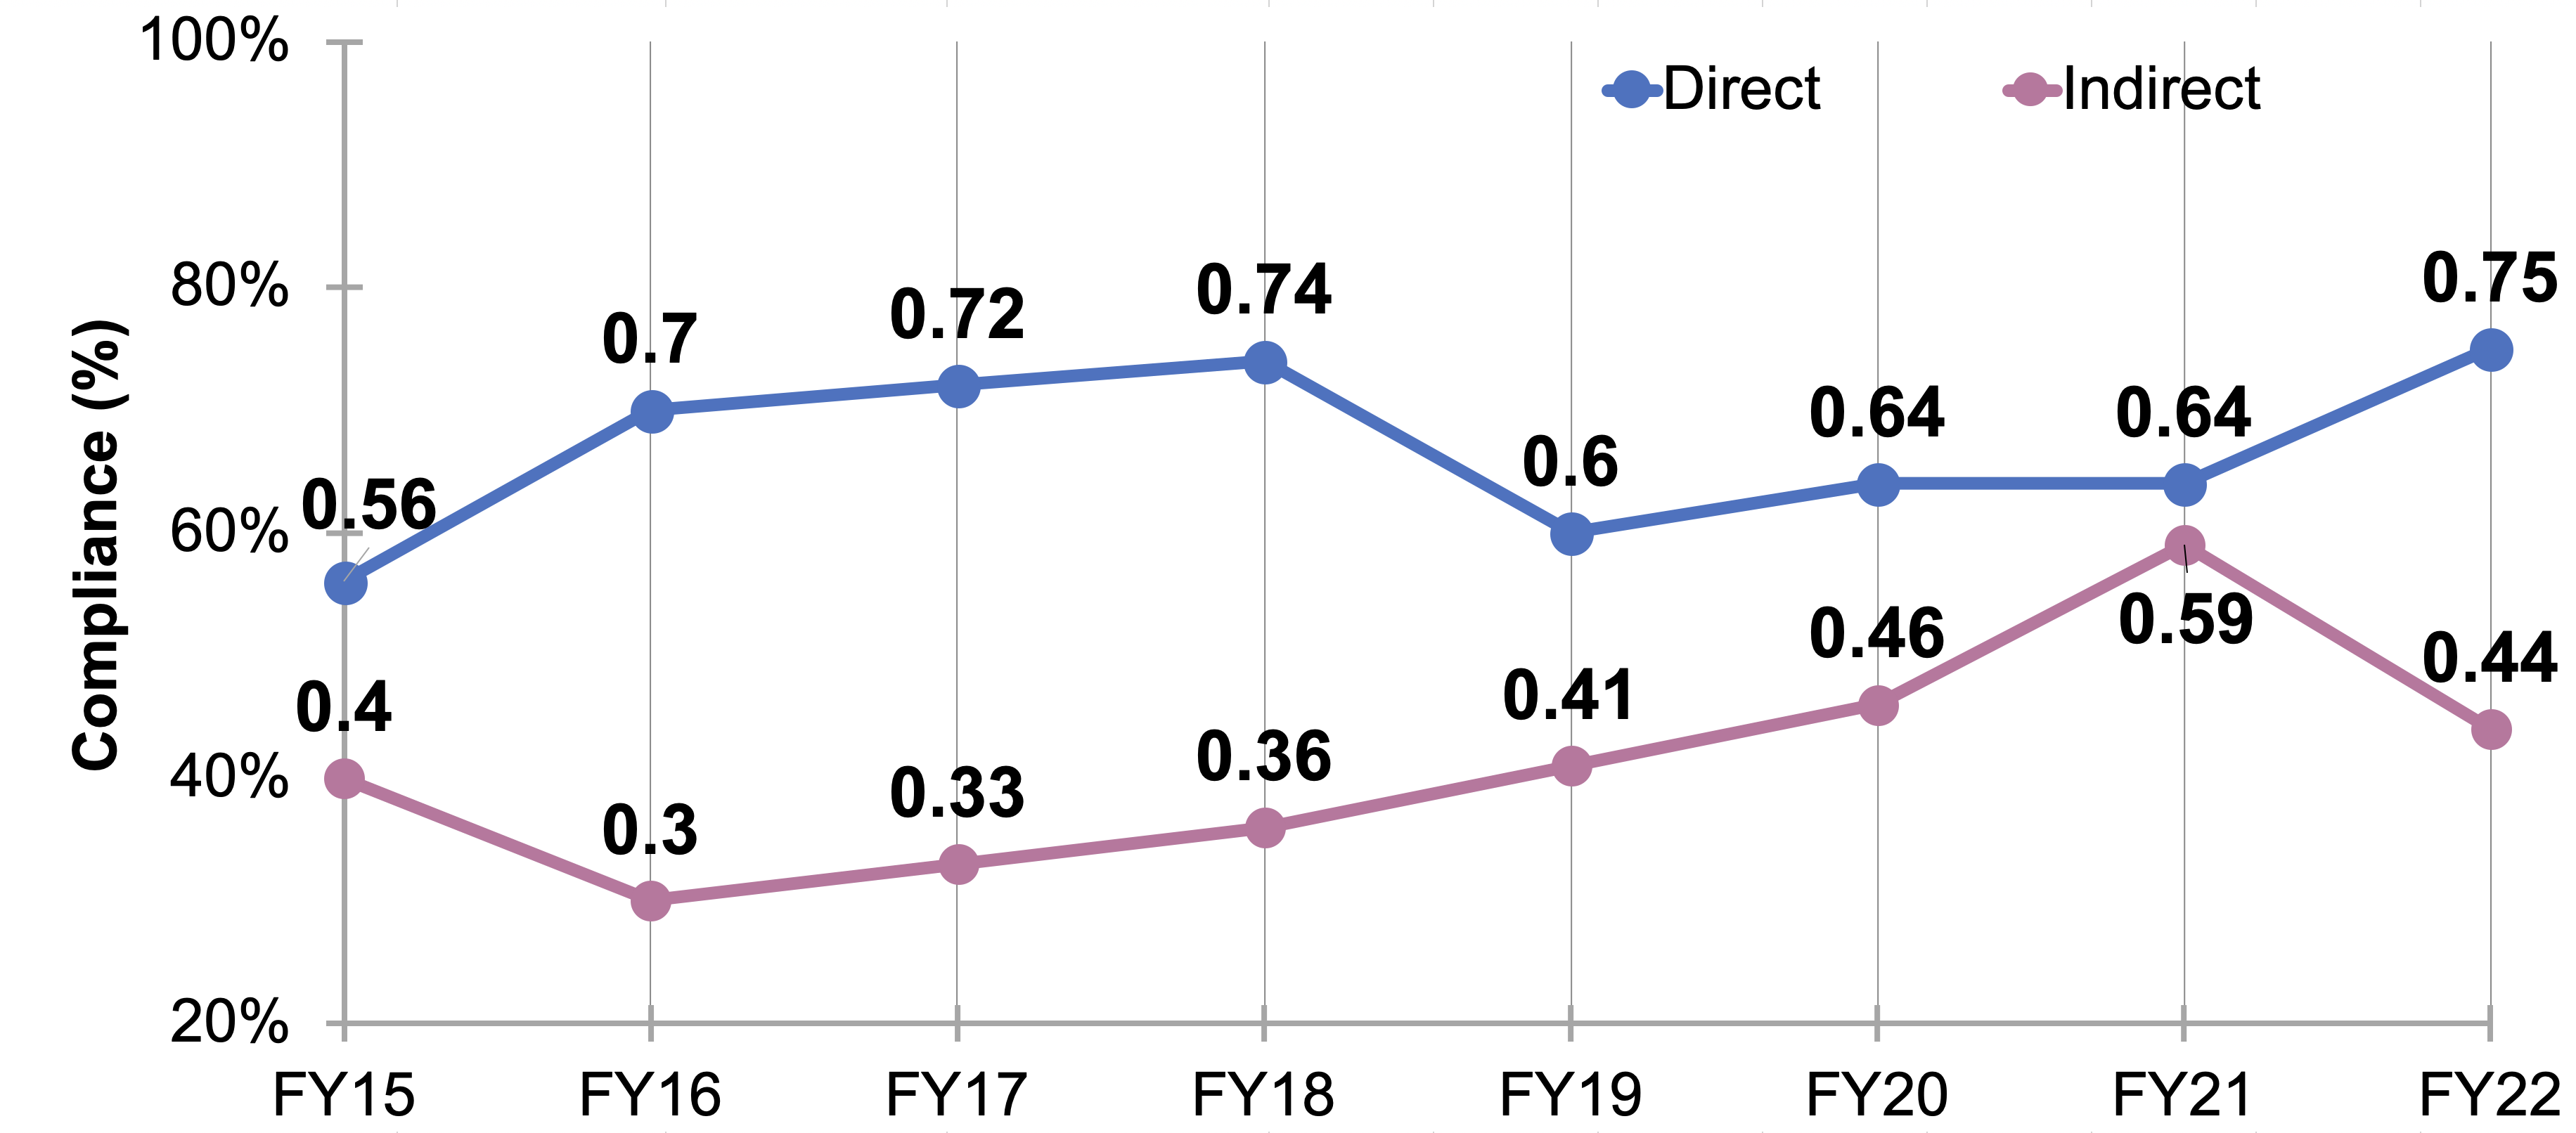 Graph of compliance for direct versus indirect solicitations from FY2015 to FY2022